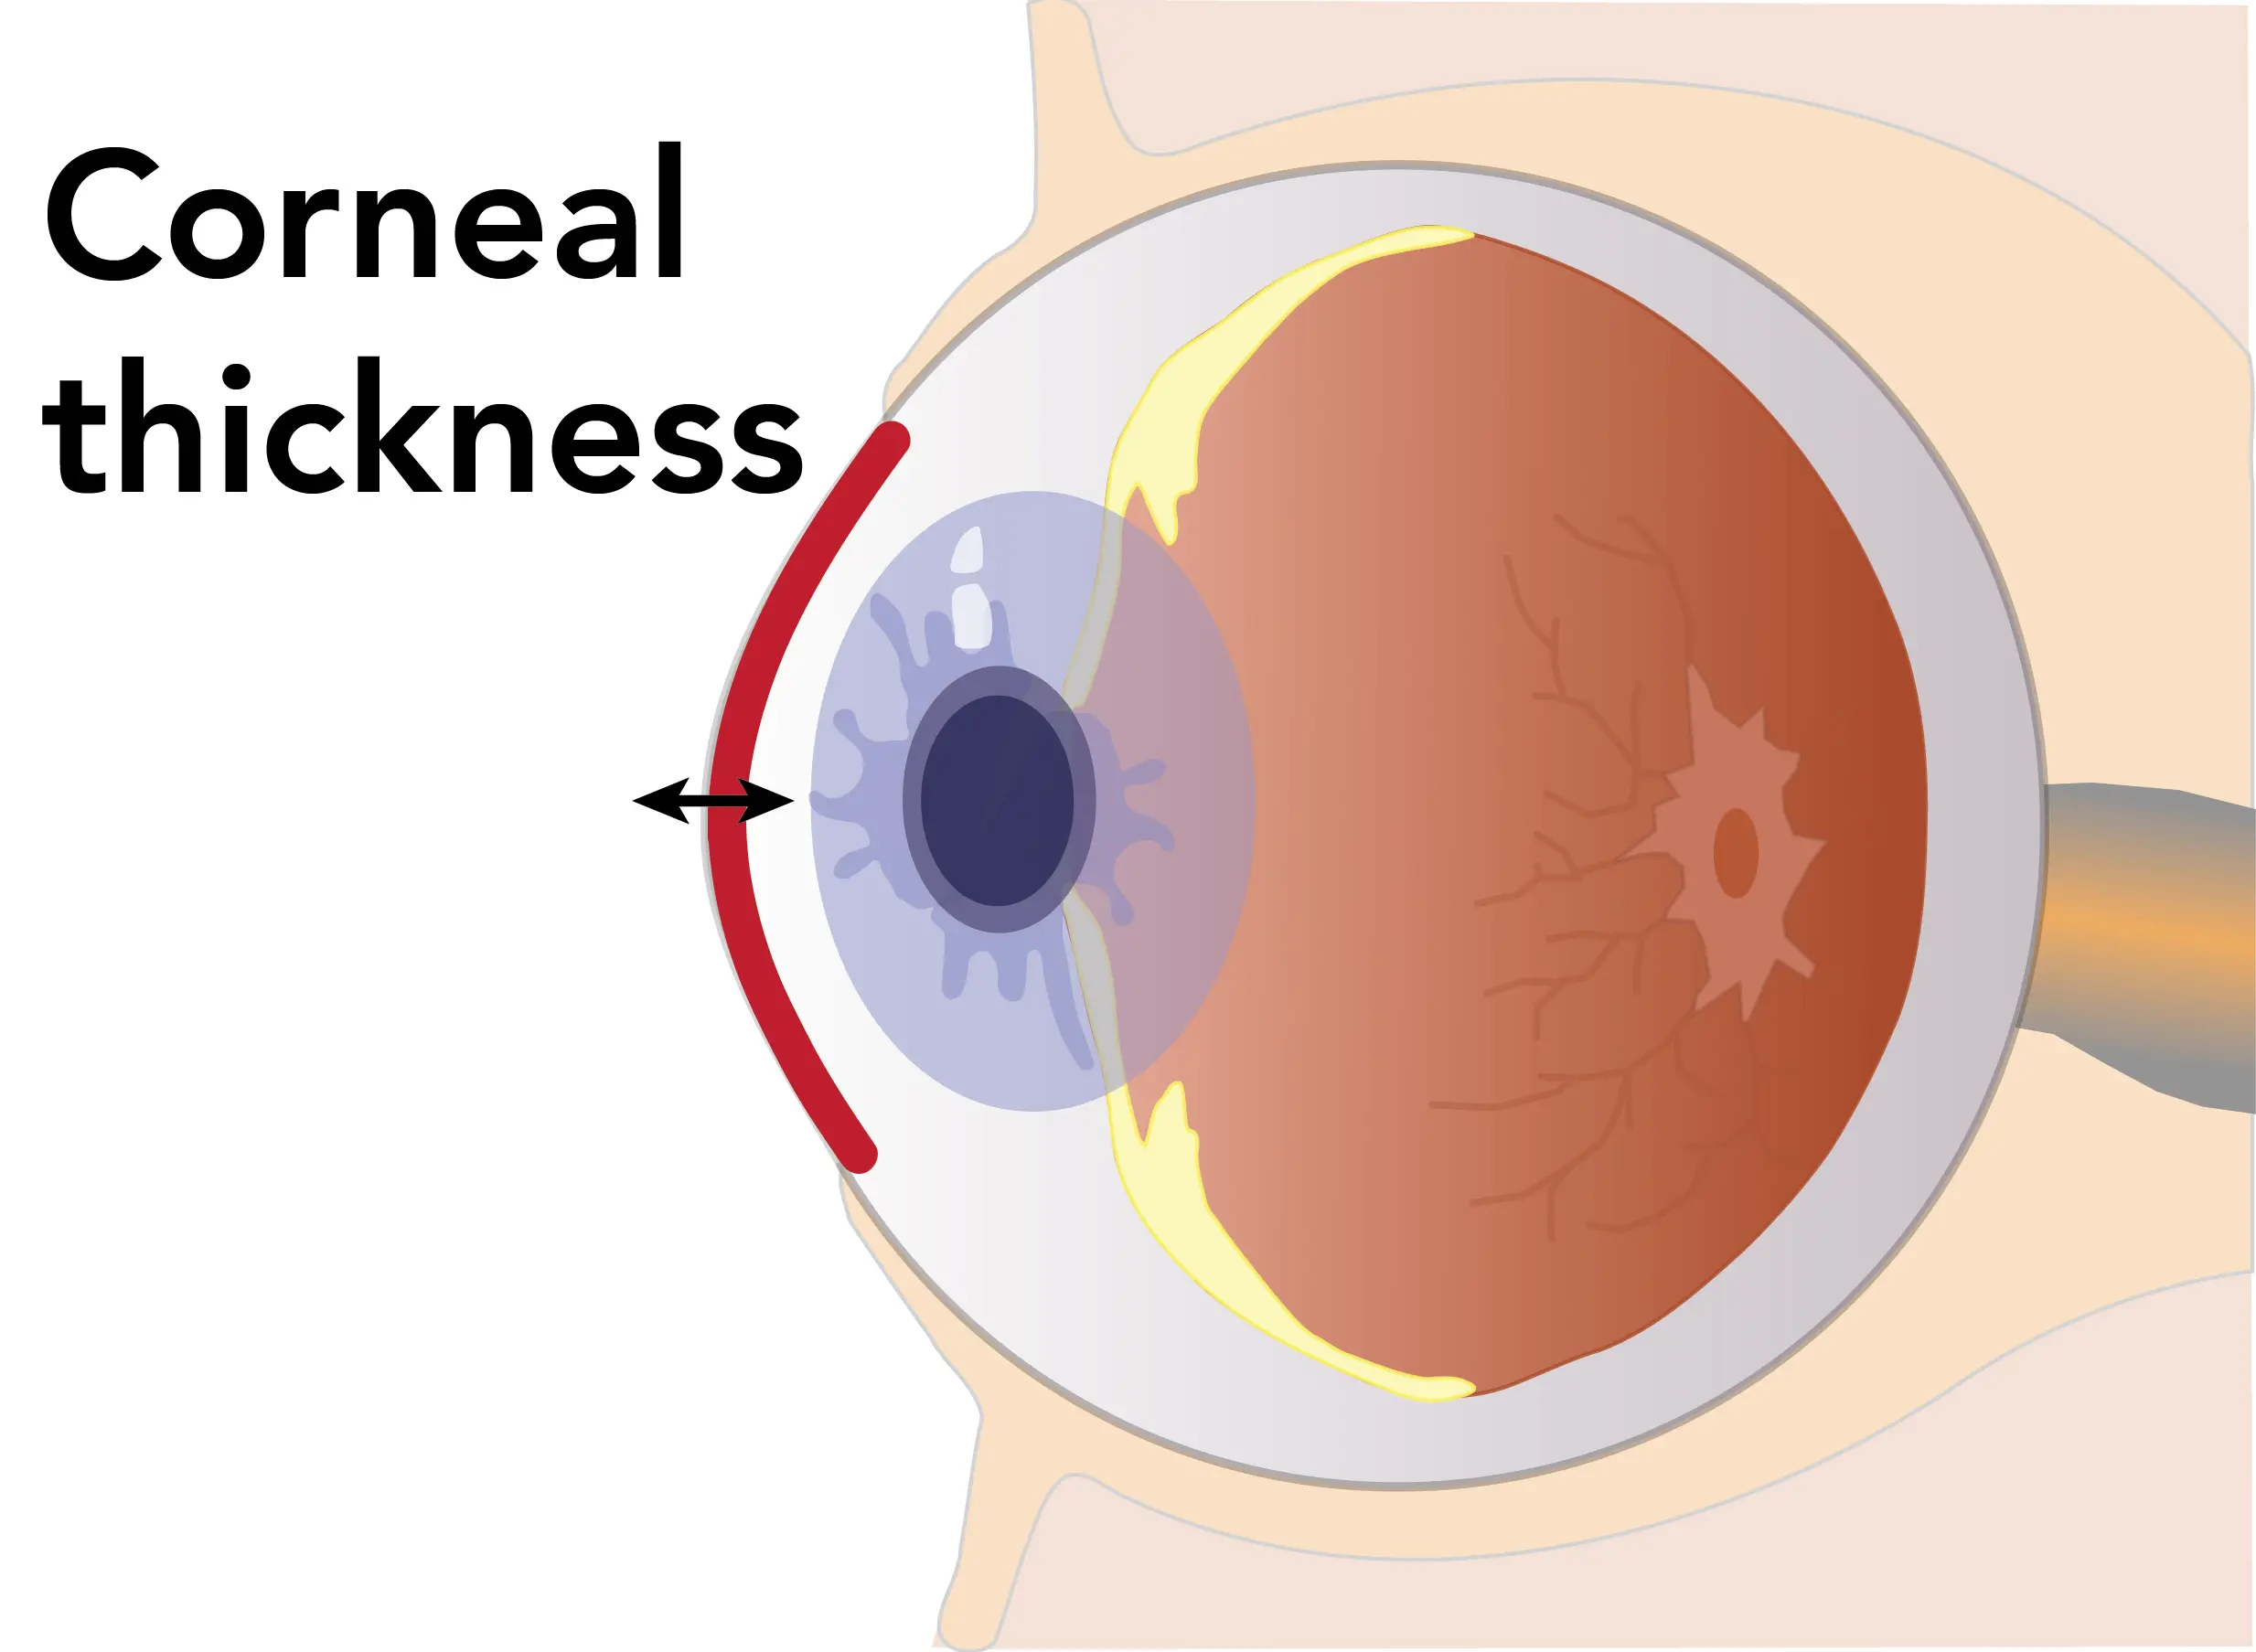 A normal cornea is approximately 0.5 millimiters thick at the center.